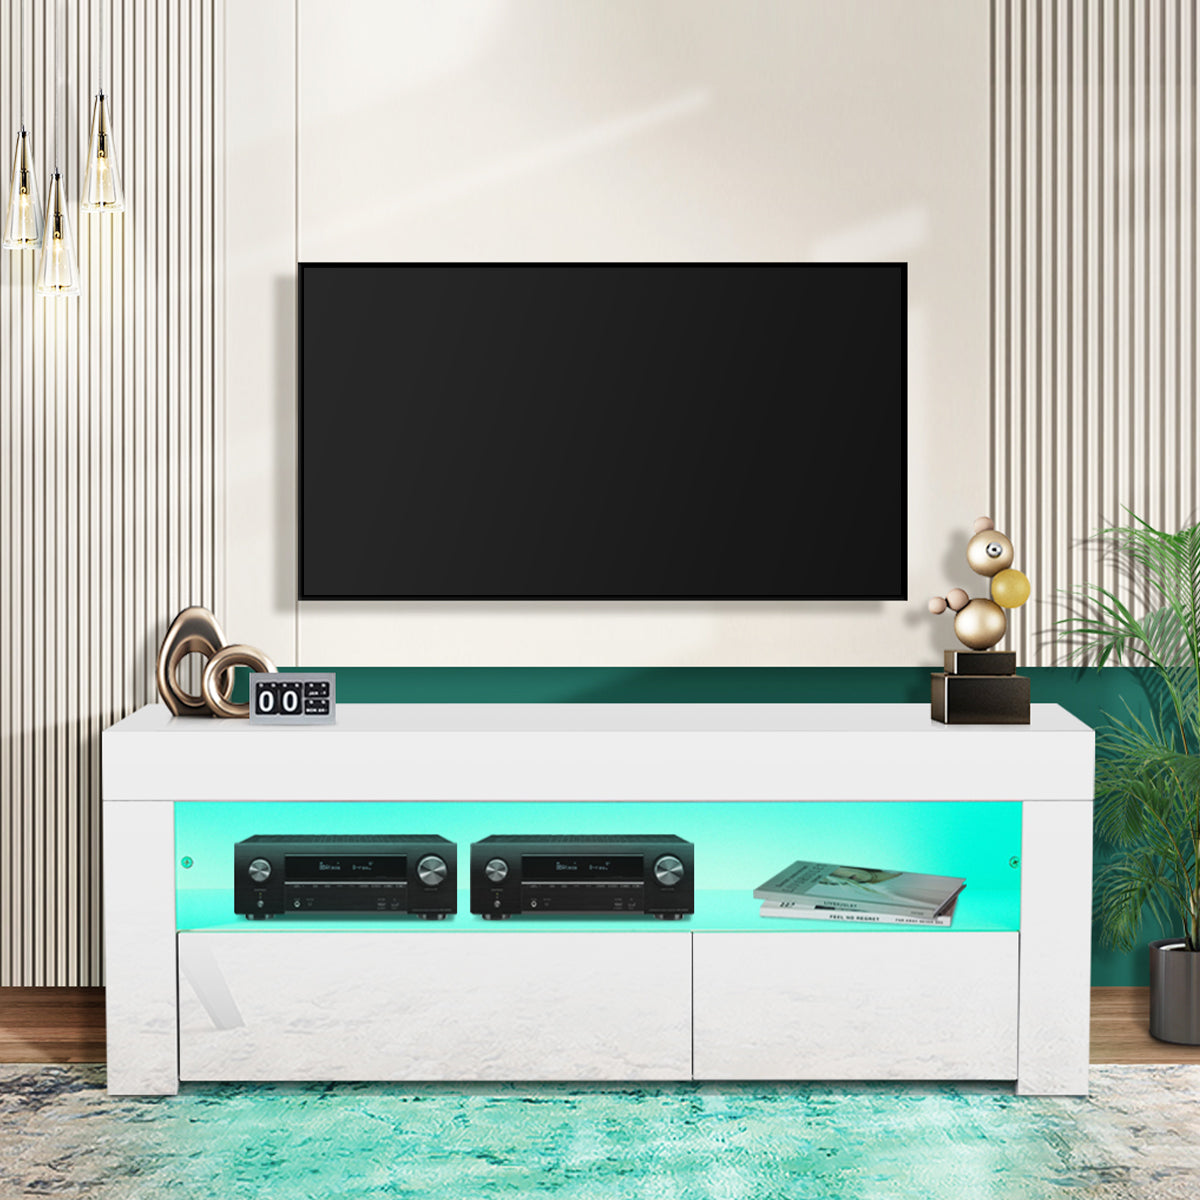 Woodyhome™ TV Stand High Gloss LED  Cabinet with Drawers Entertainment Center for 55" TV